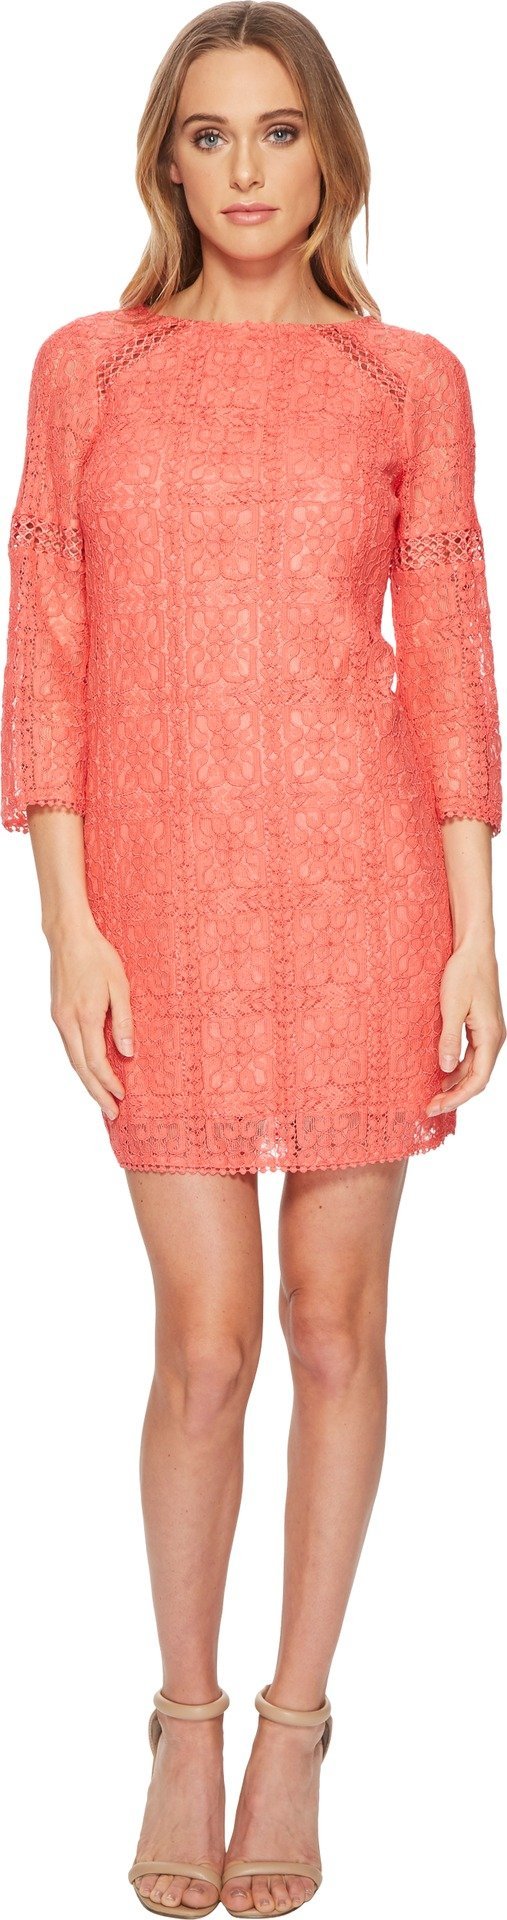 Adrianna Papell - AP1D102465 Quarter Length Sleeve Lace Shift Dress In Orange